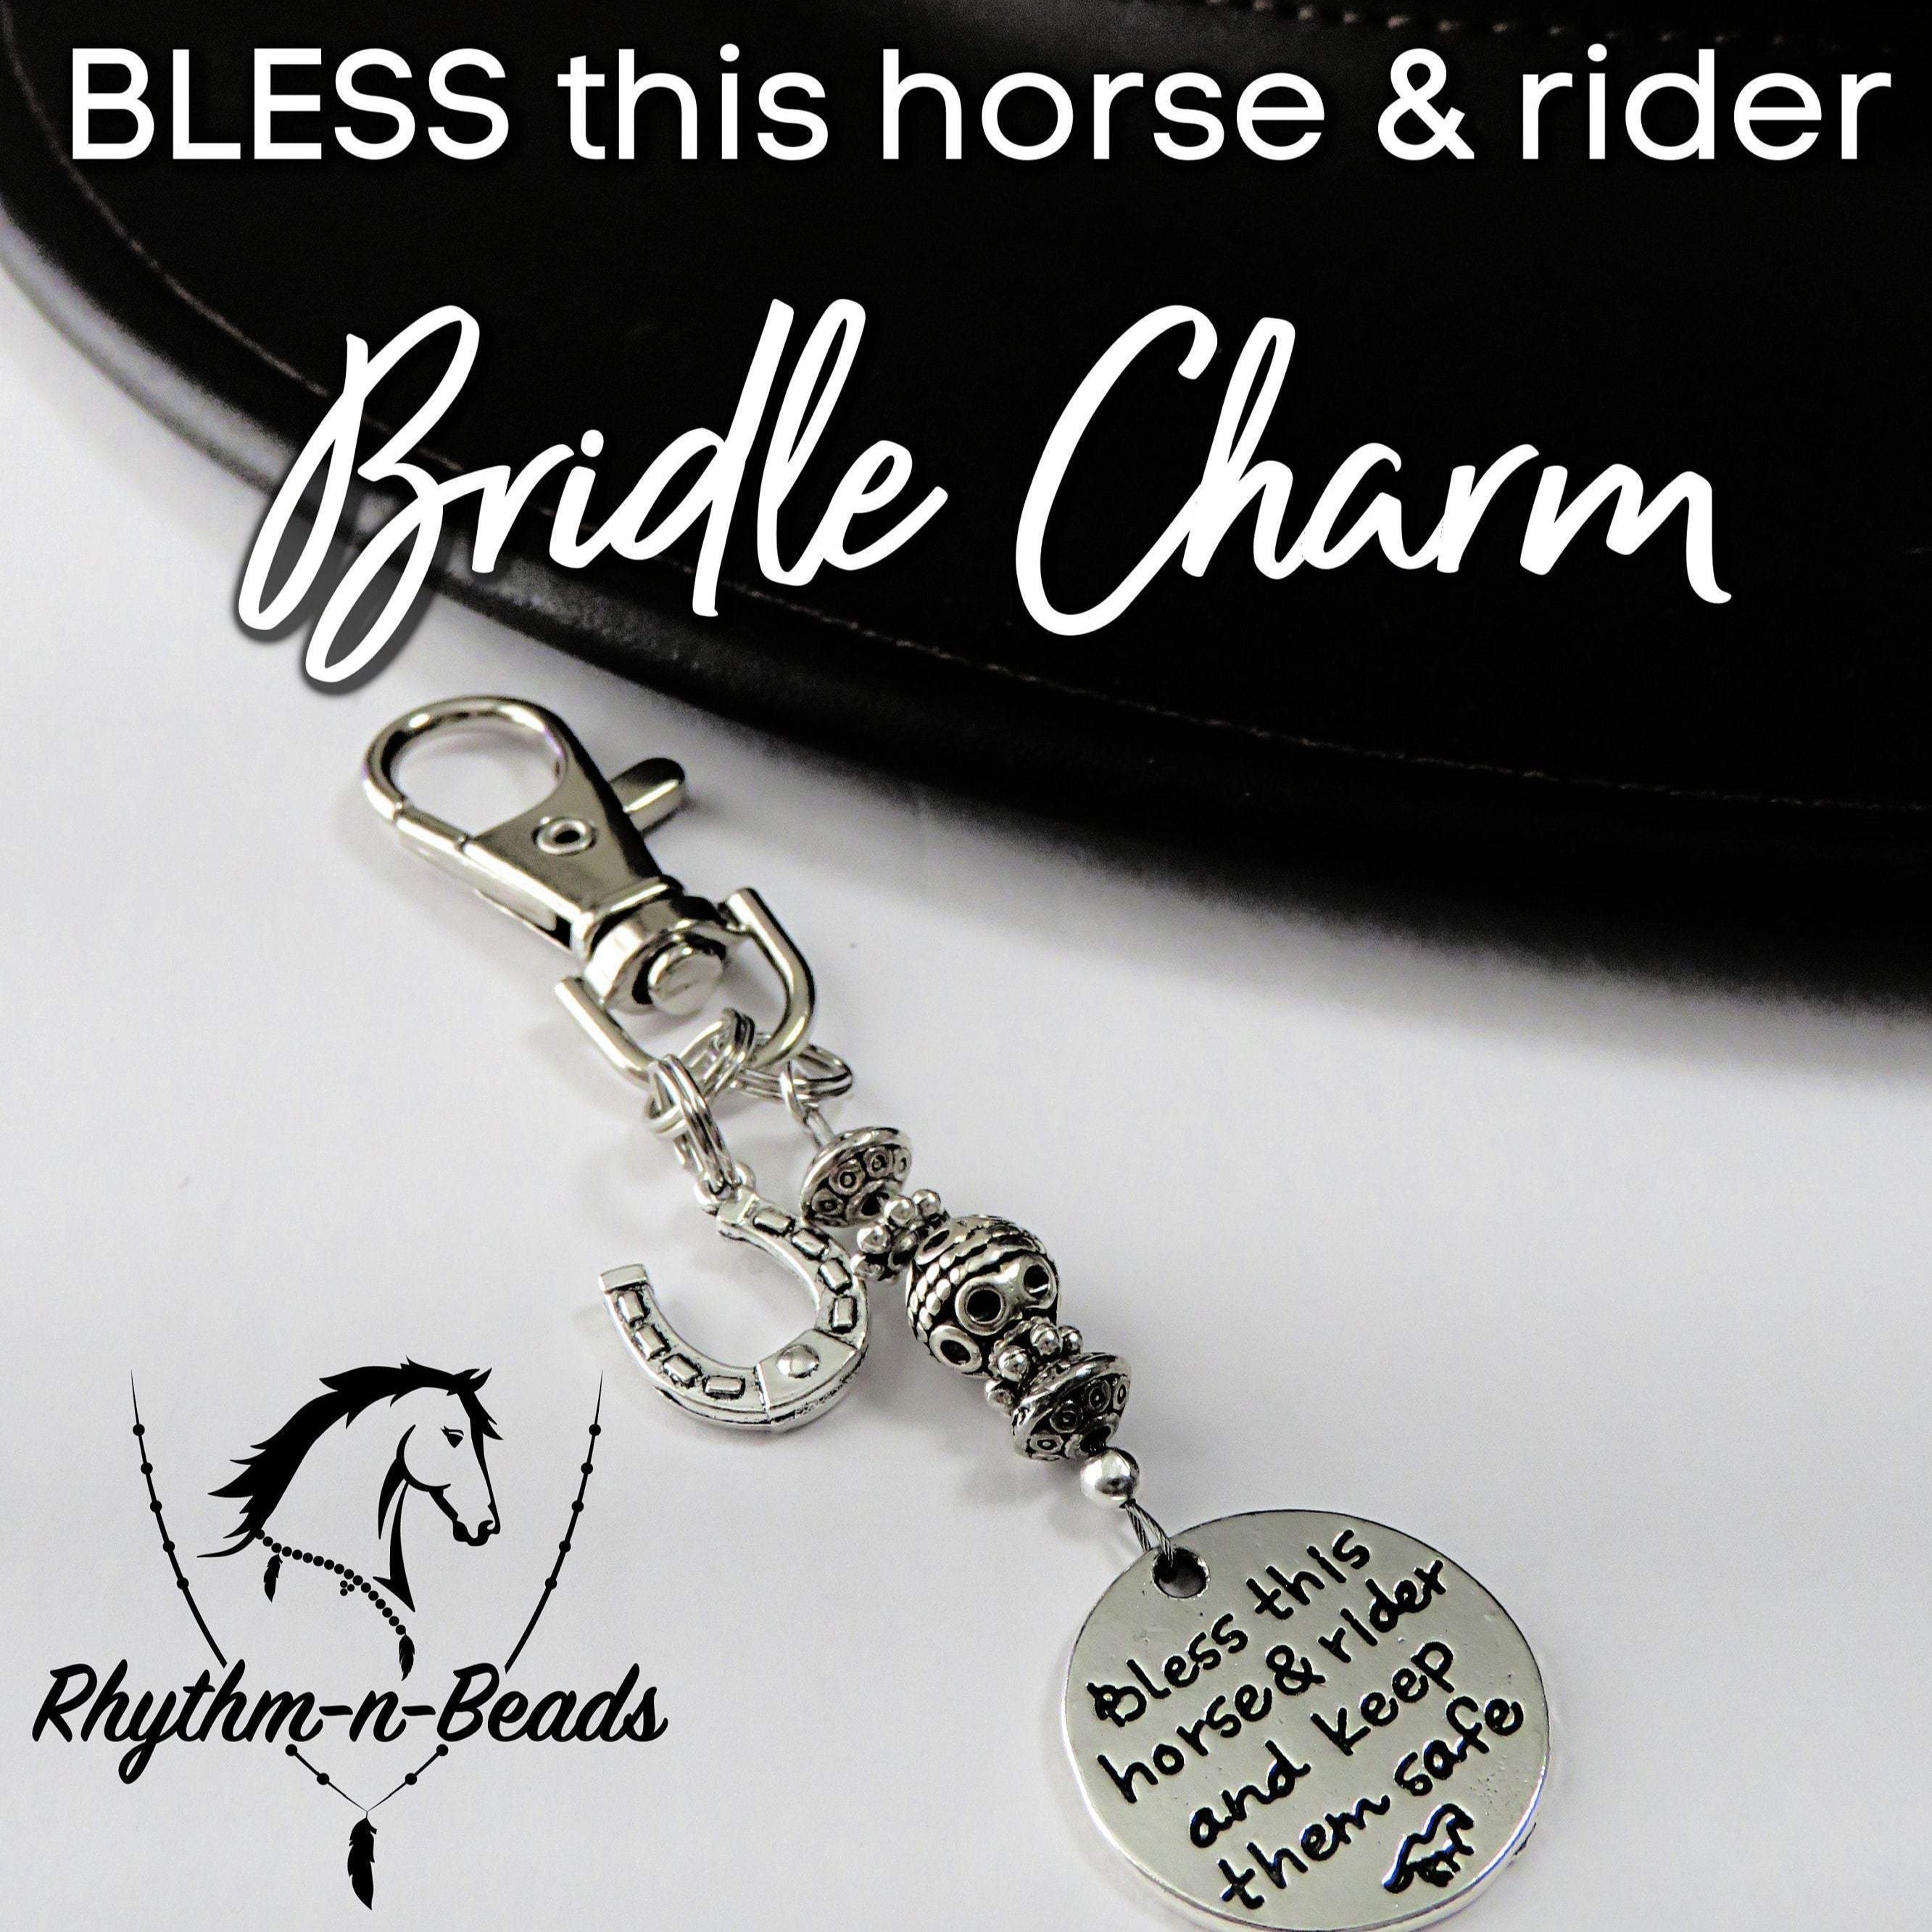 BRIDLE CHARM, Bless this horse and rider charm, horse tack, horse bridle decoration